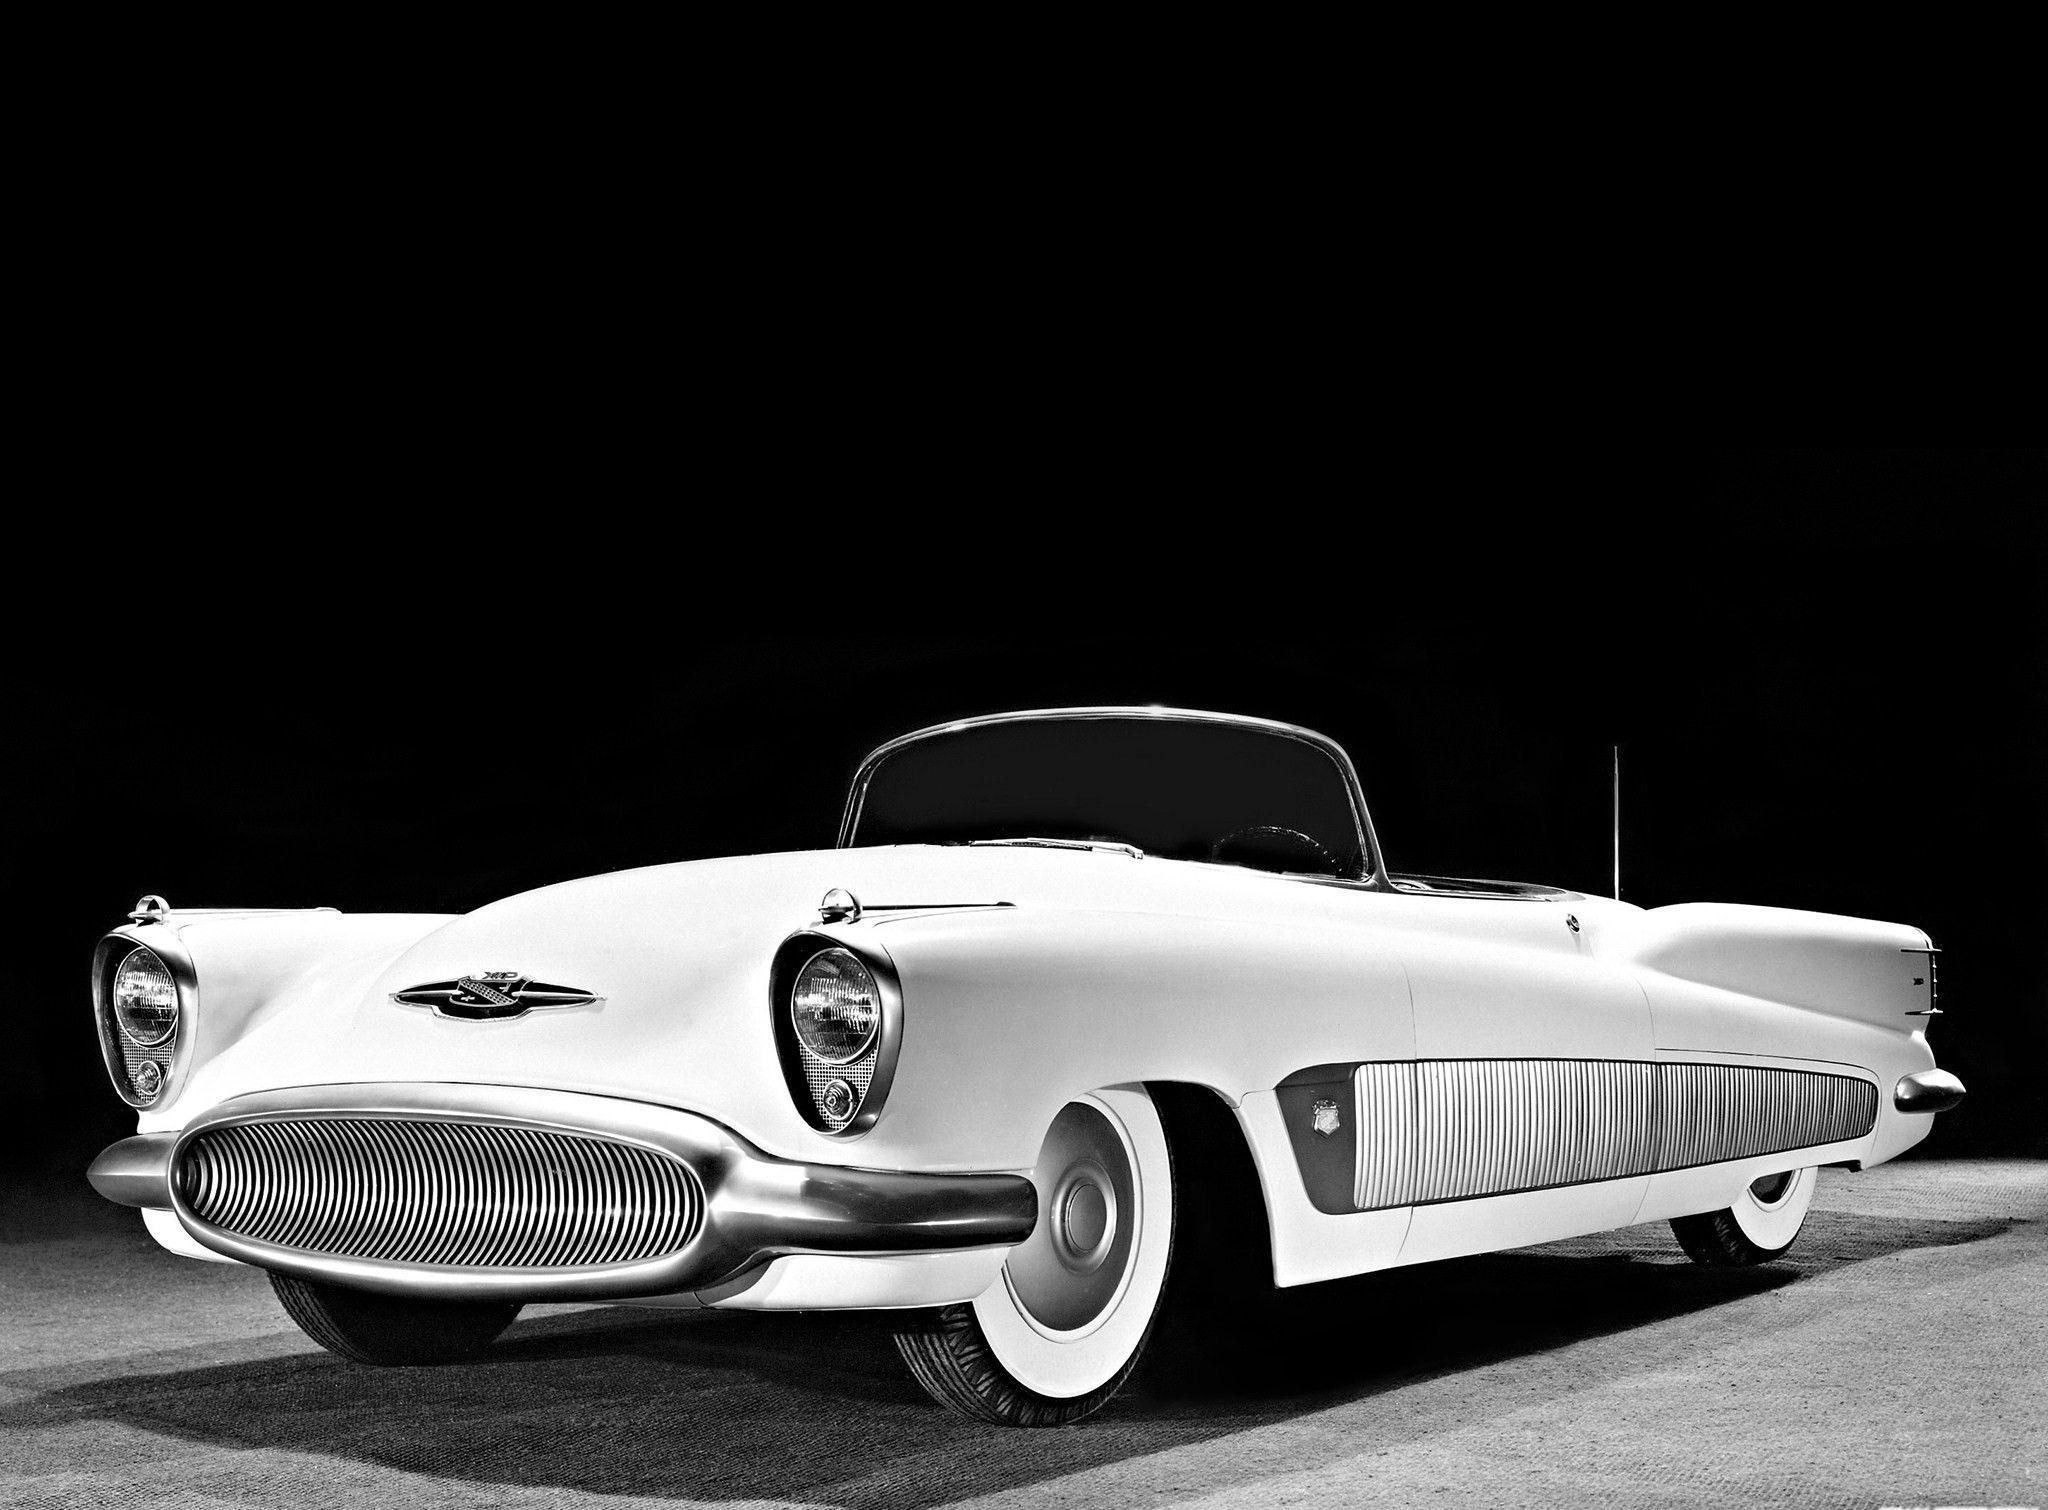 Black And White Classic Car Wallpaper - Automotive Wallpapers